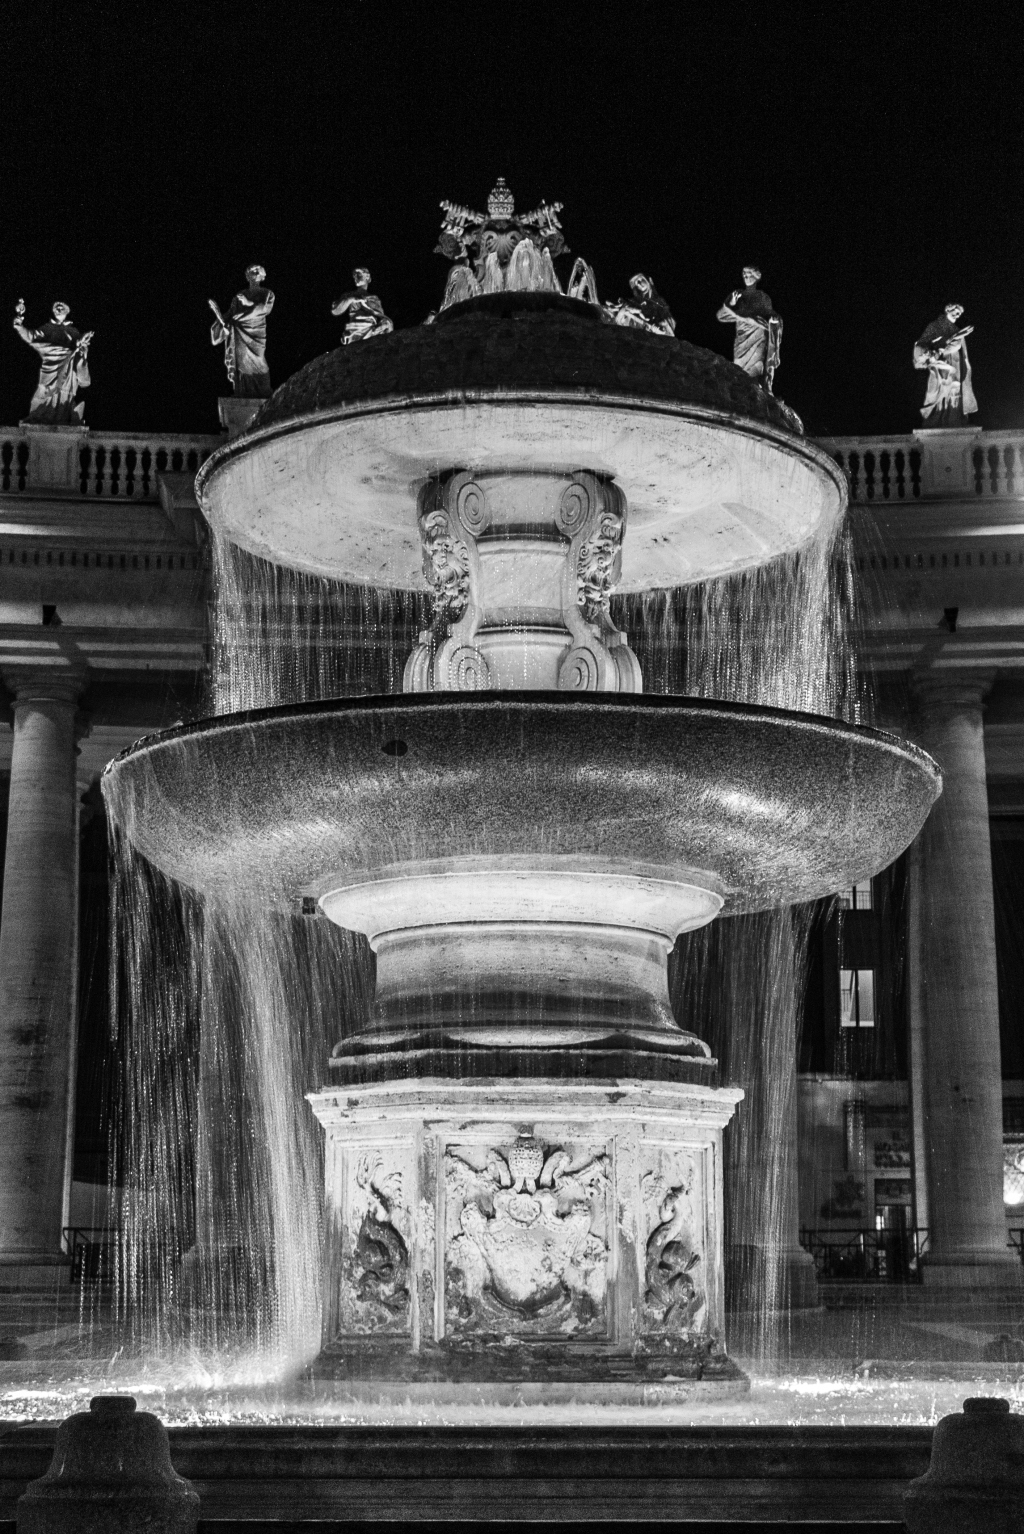 Fountain at St Peter’s Basilica, Rome